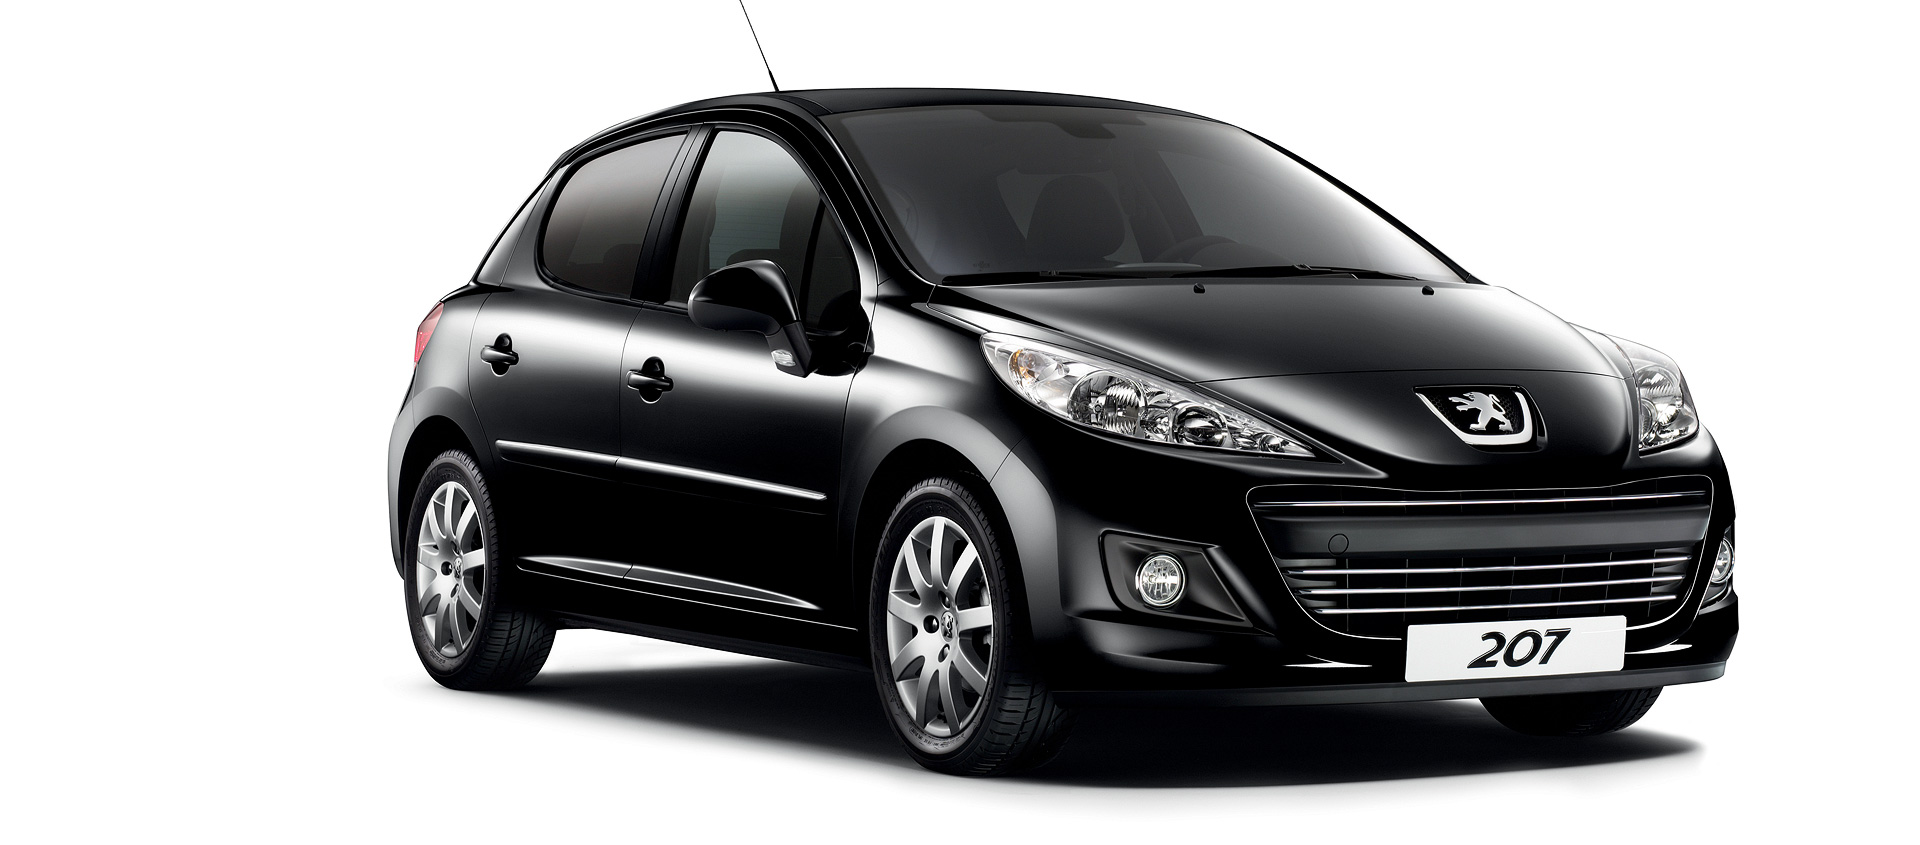 High Quality Tuning Files Peugeot 207 1.4 HDi 68hp